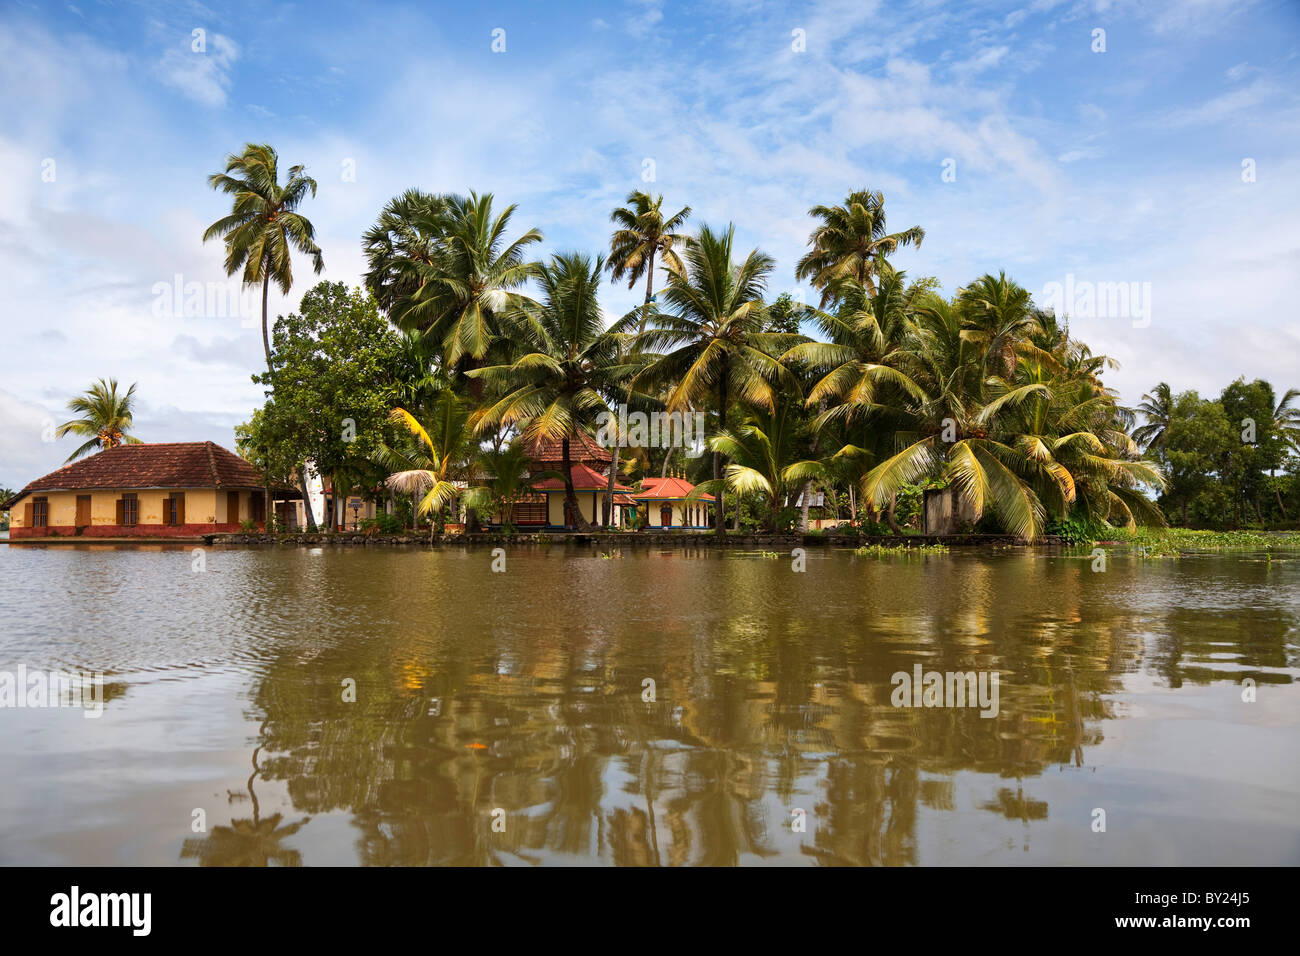 India, Alleppey. Il Kerala backwaters. Foto Stock